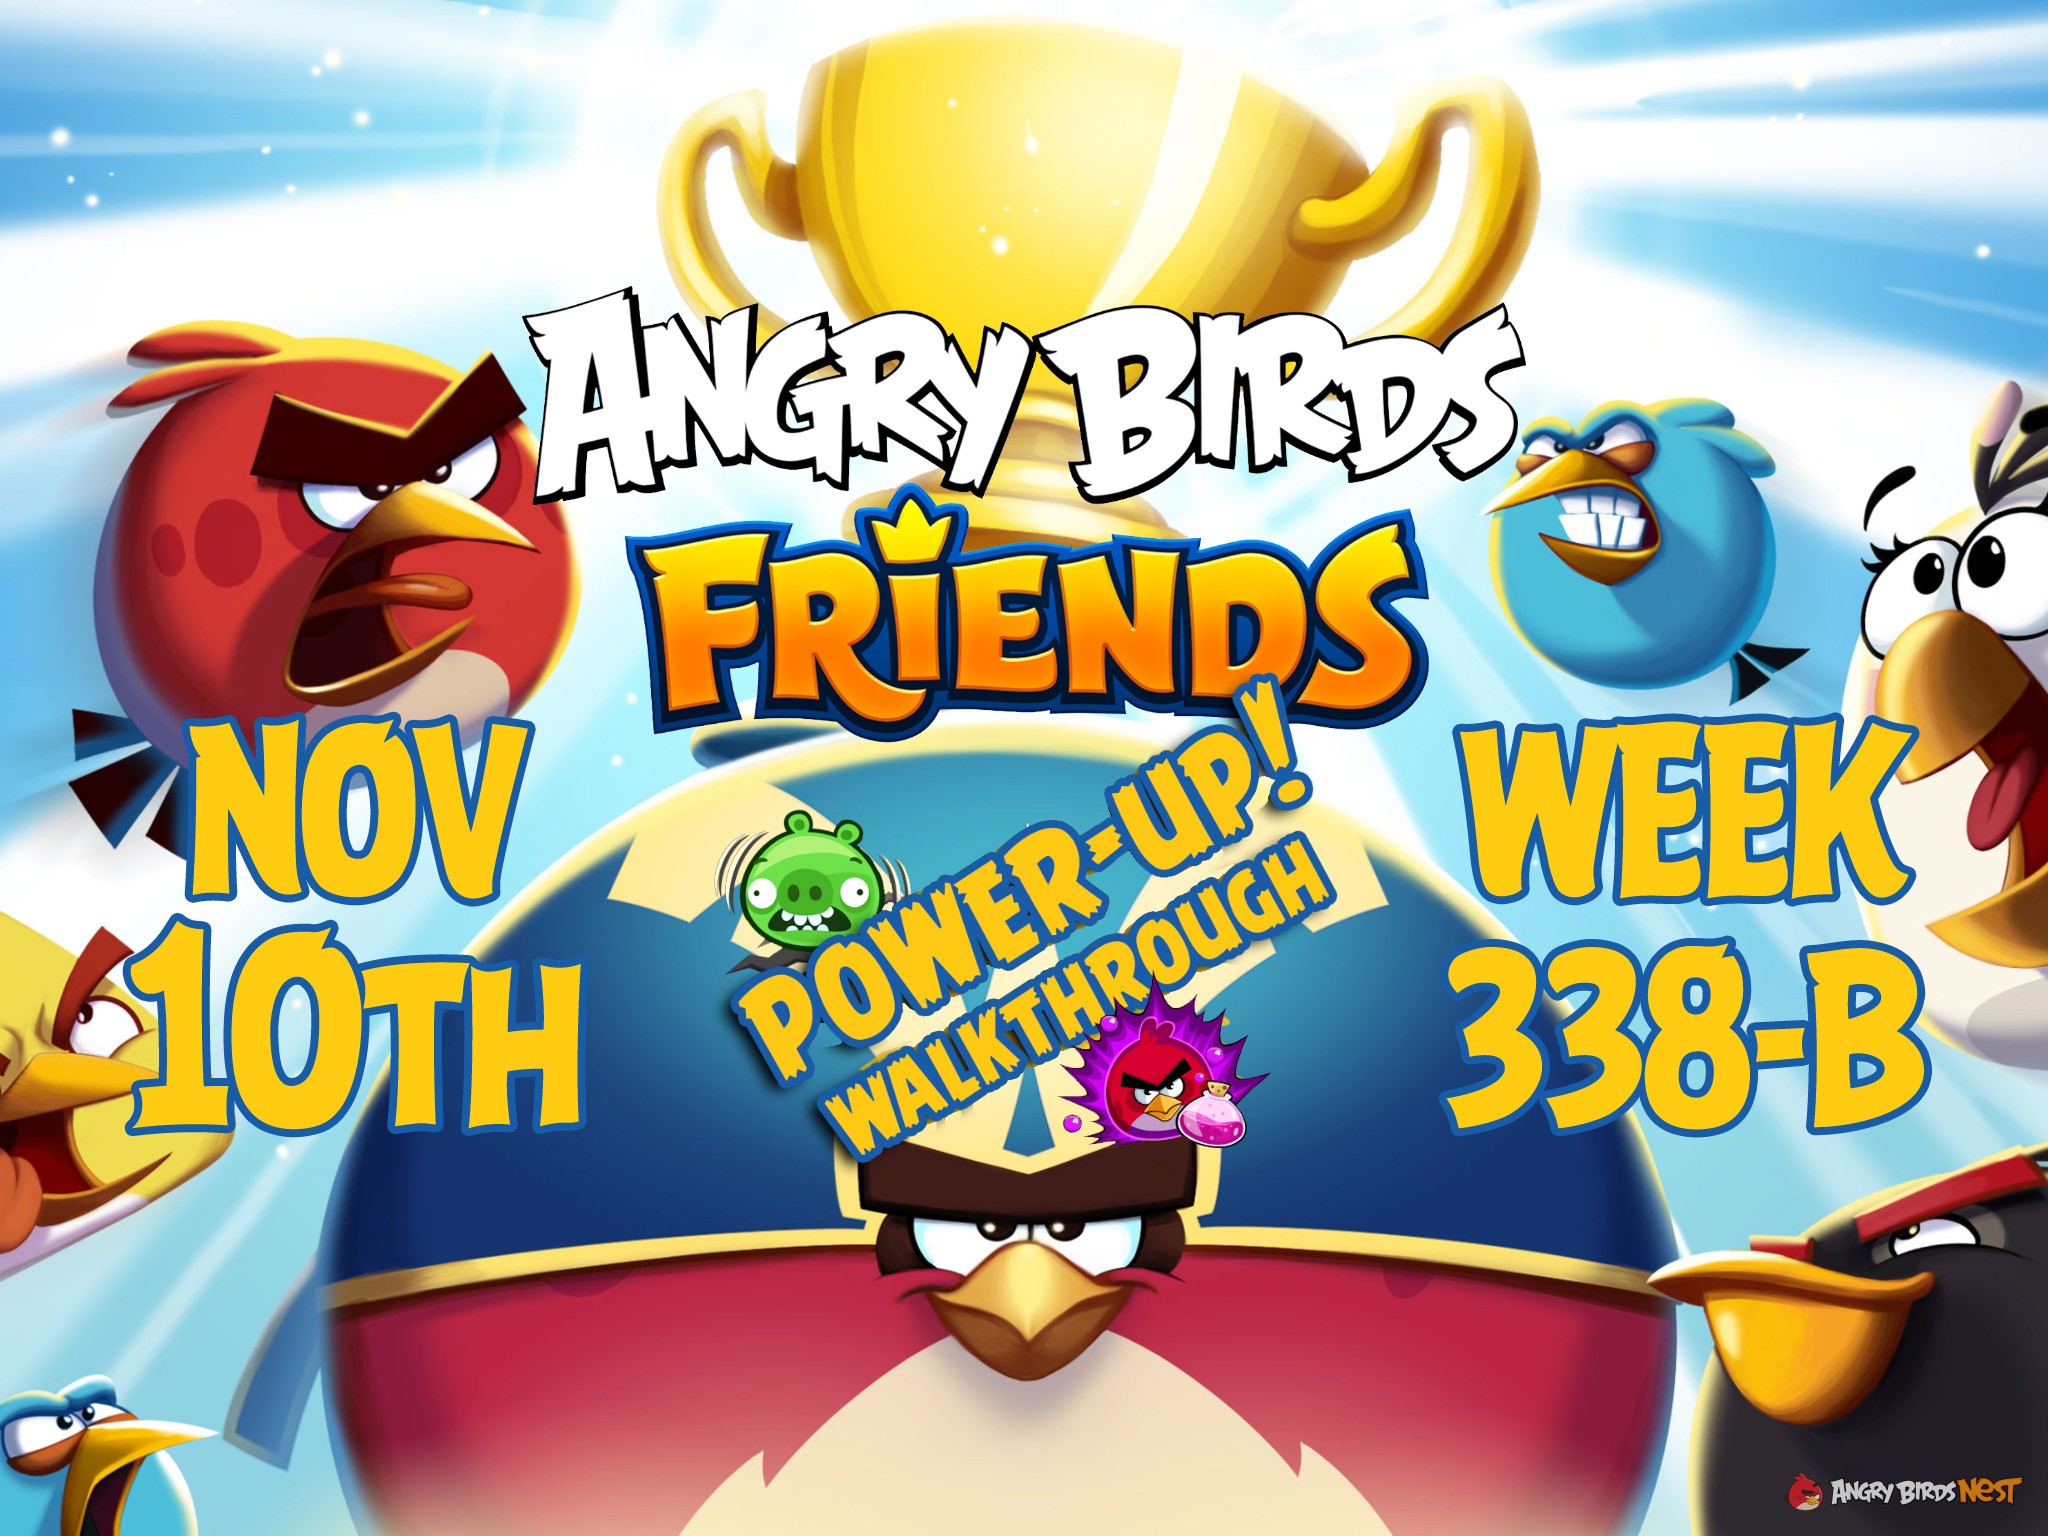 Angry-Birds-Friends-Tournament-Week-338-B-Feature-Image-PU